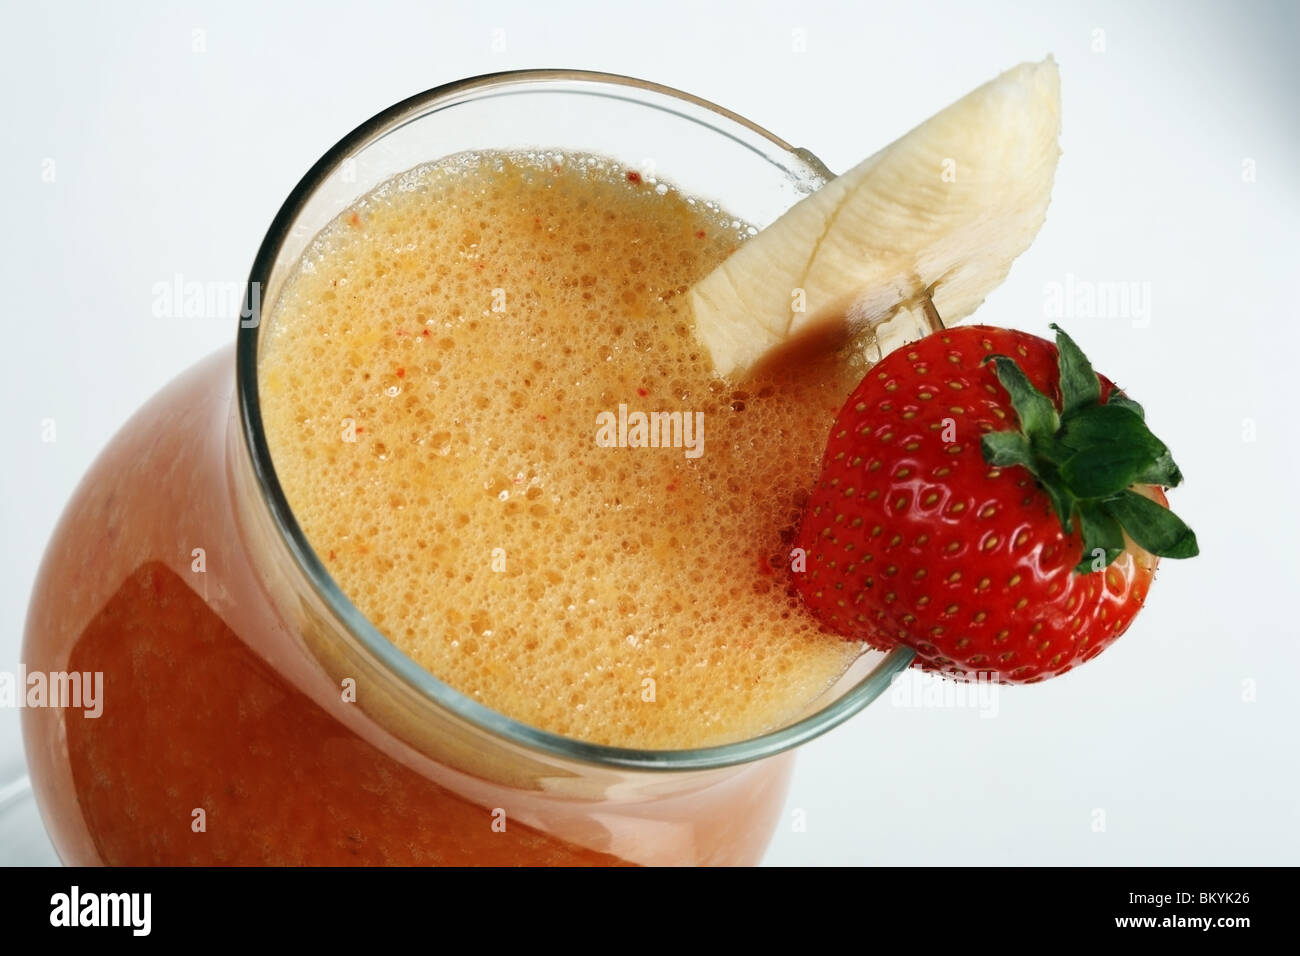 Banana and strawberry smoothies. Close-up on a grey background. Stock Photo